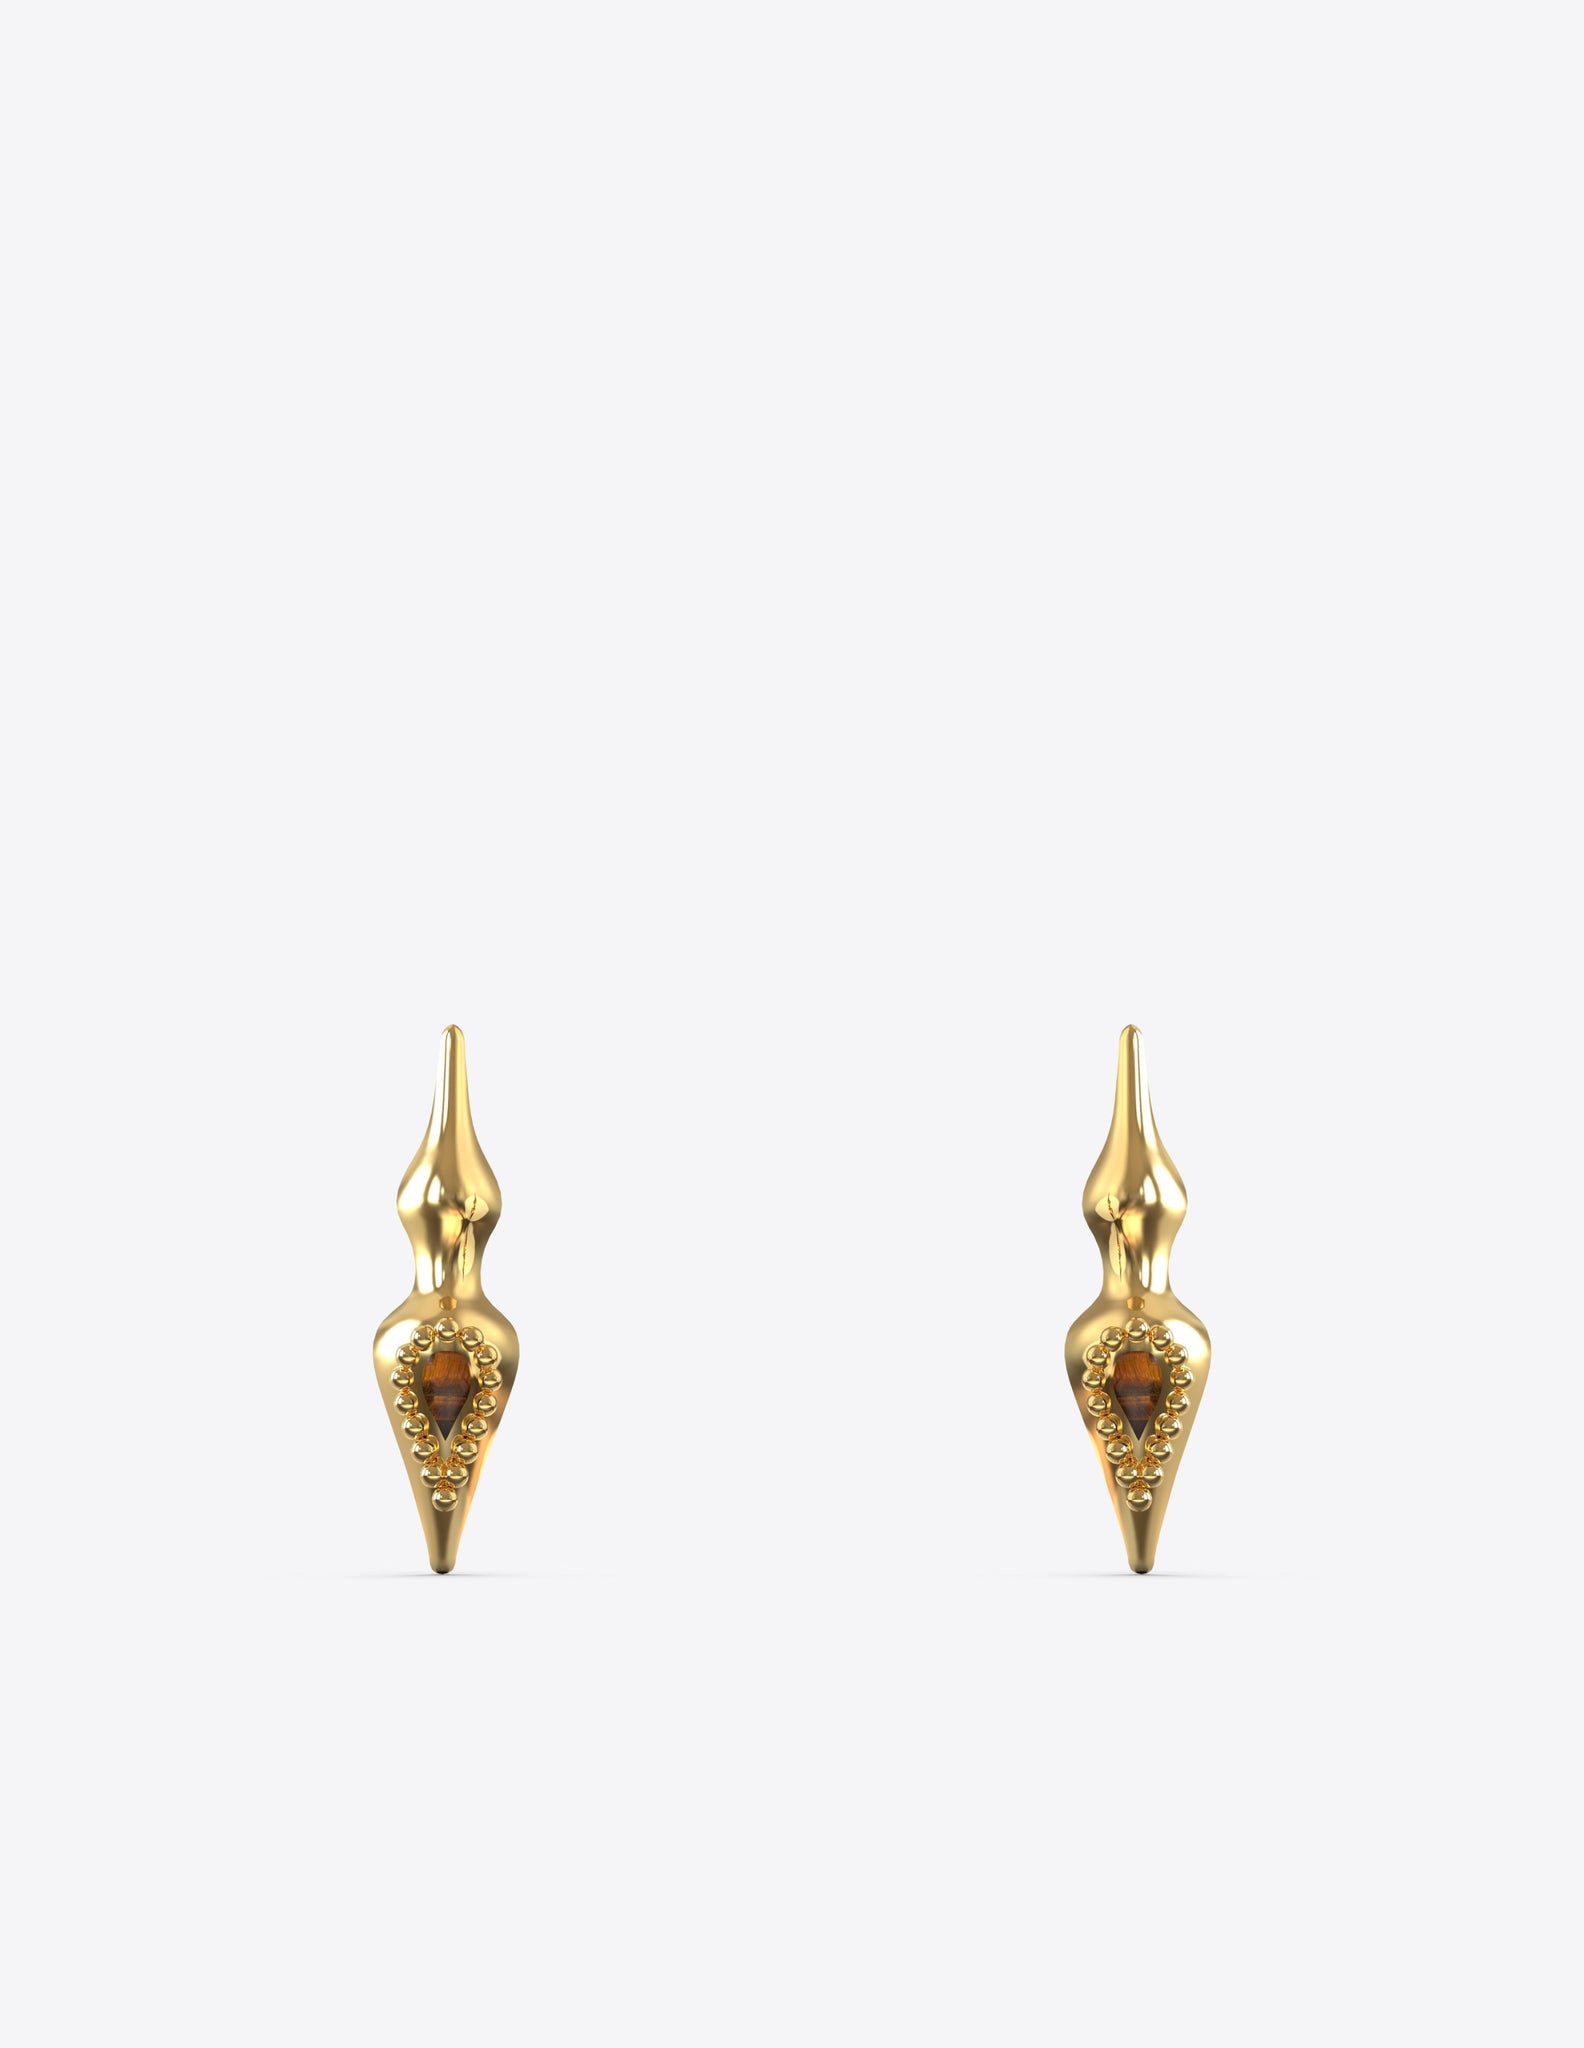 Arrowhead Studs with Tiger Eye Inlay in Polished Gold Vermeil